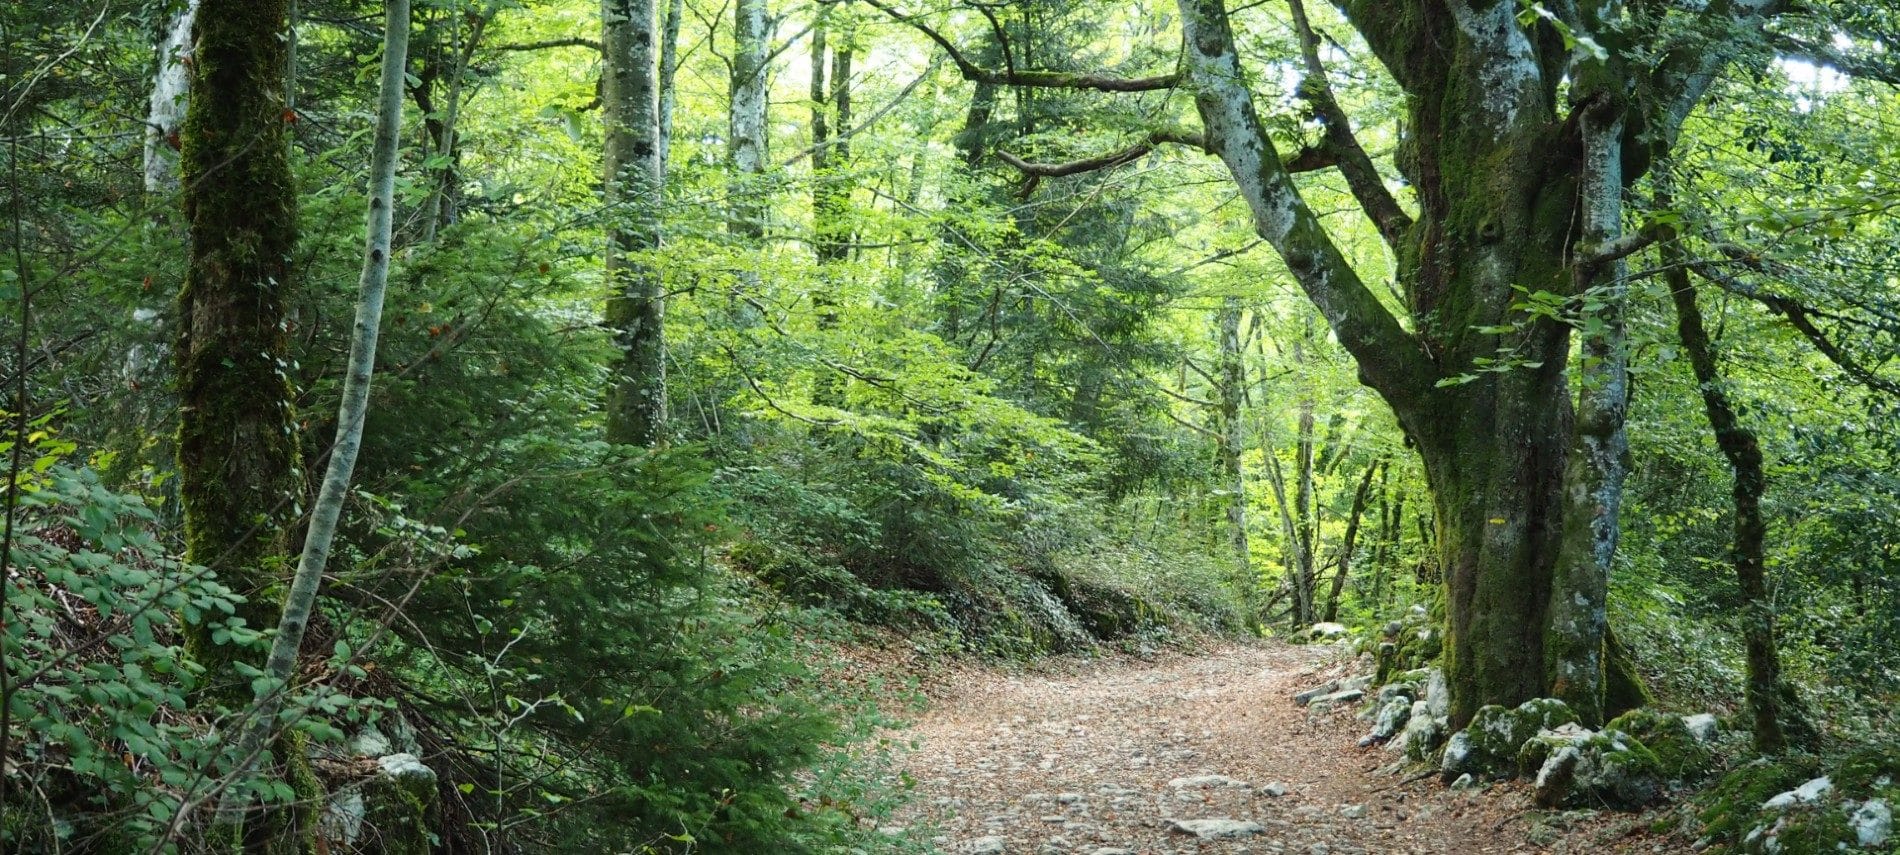 Dense forested area with tall green trees and one solitary empty trail